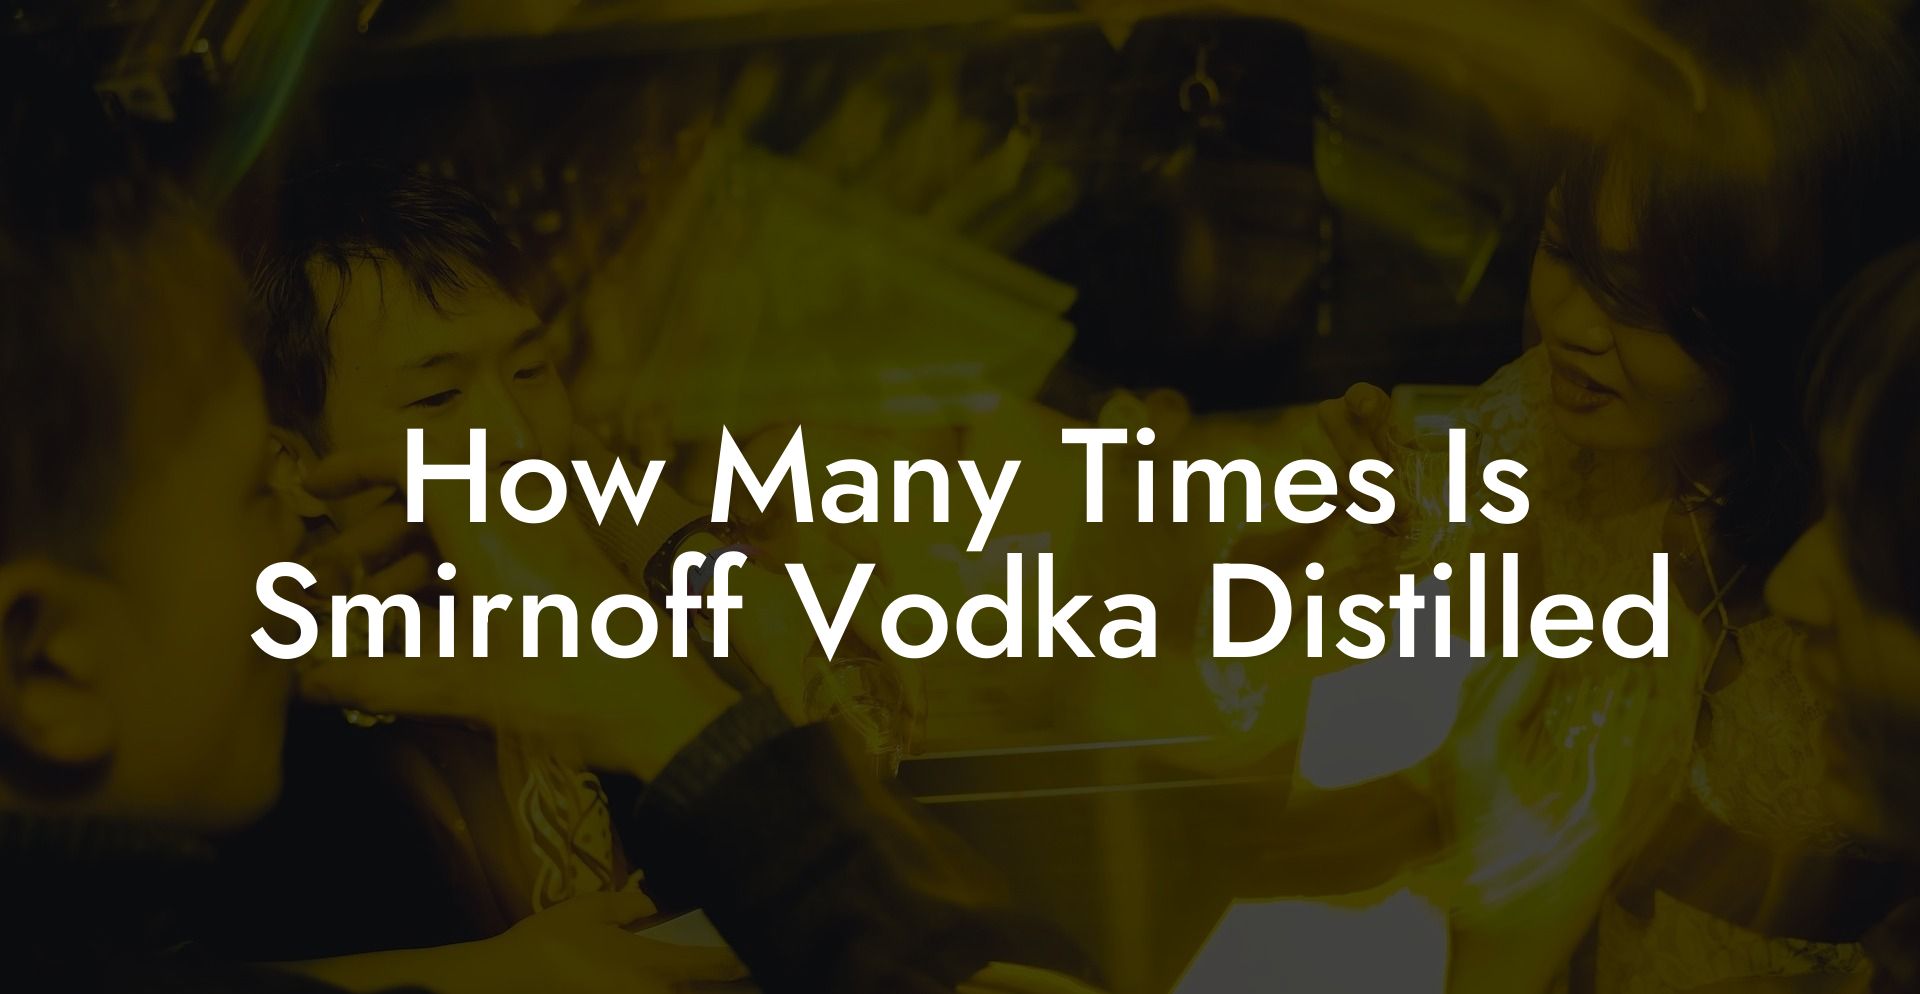 How Many Times Is Smirnoff Vodka Distilled